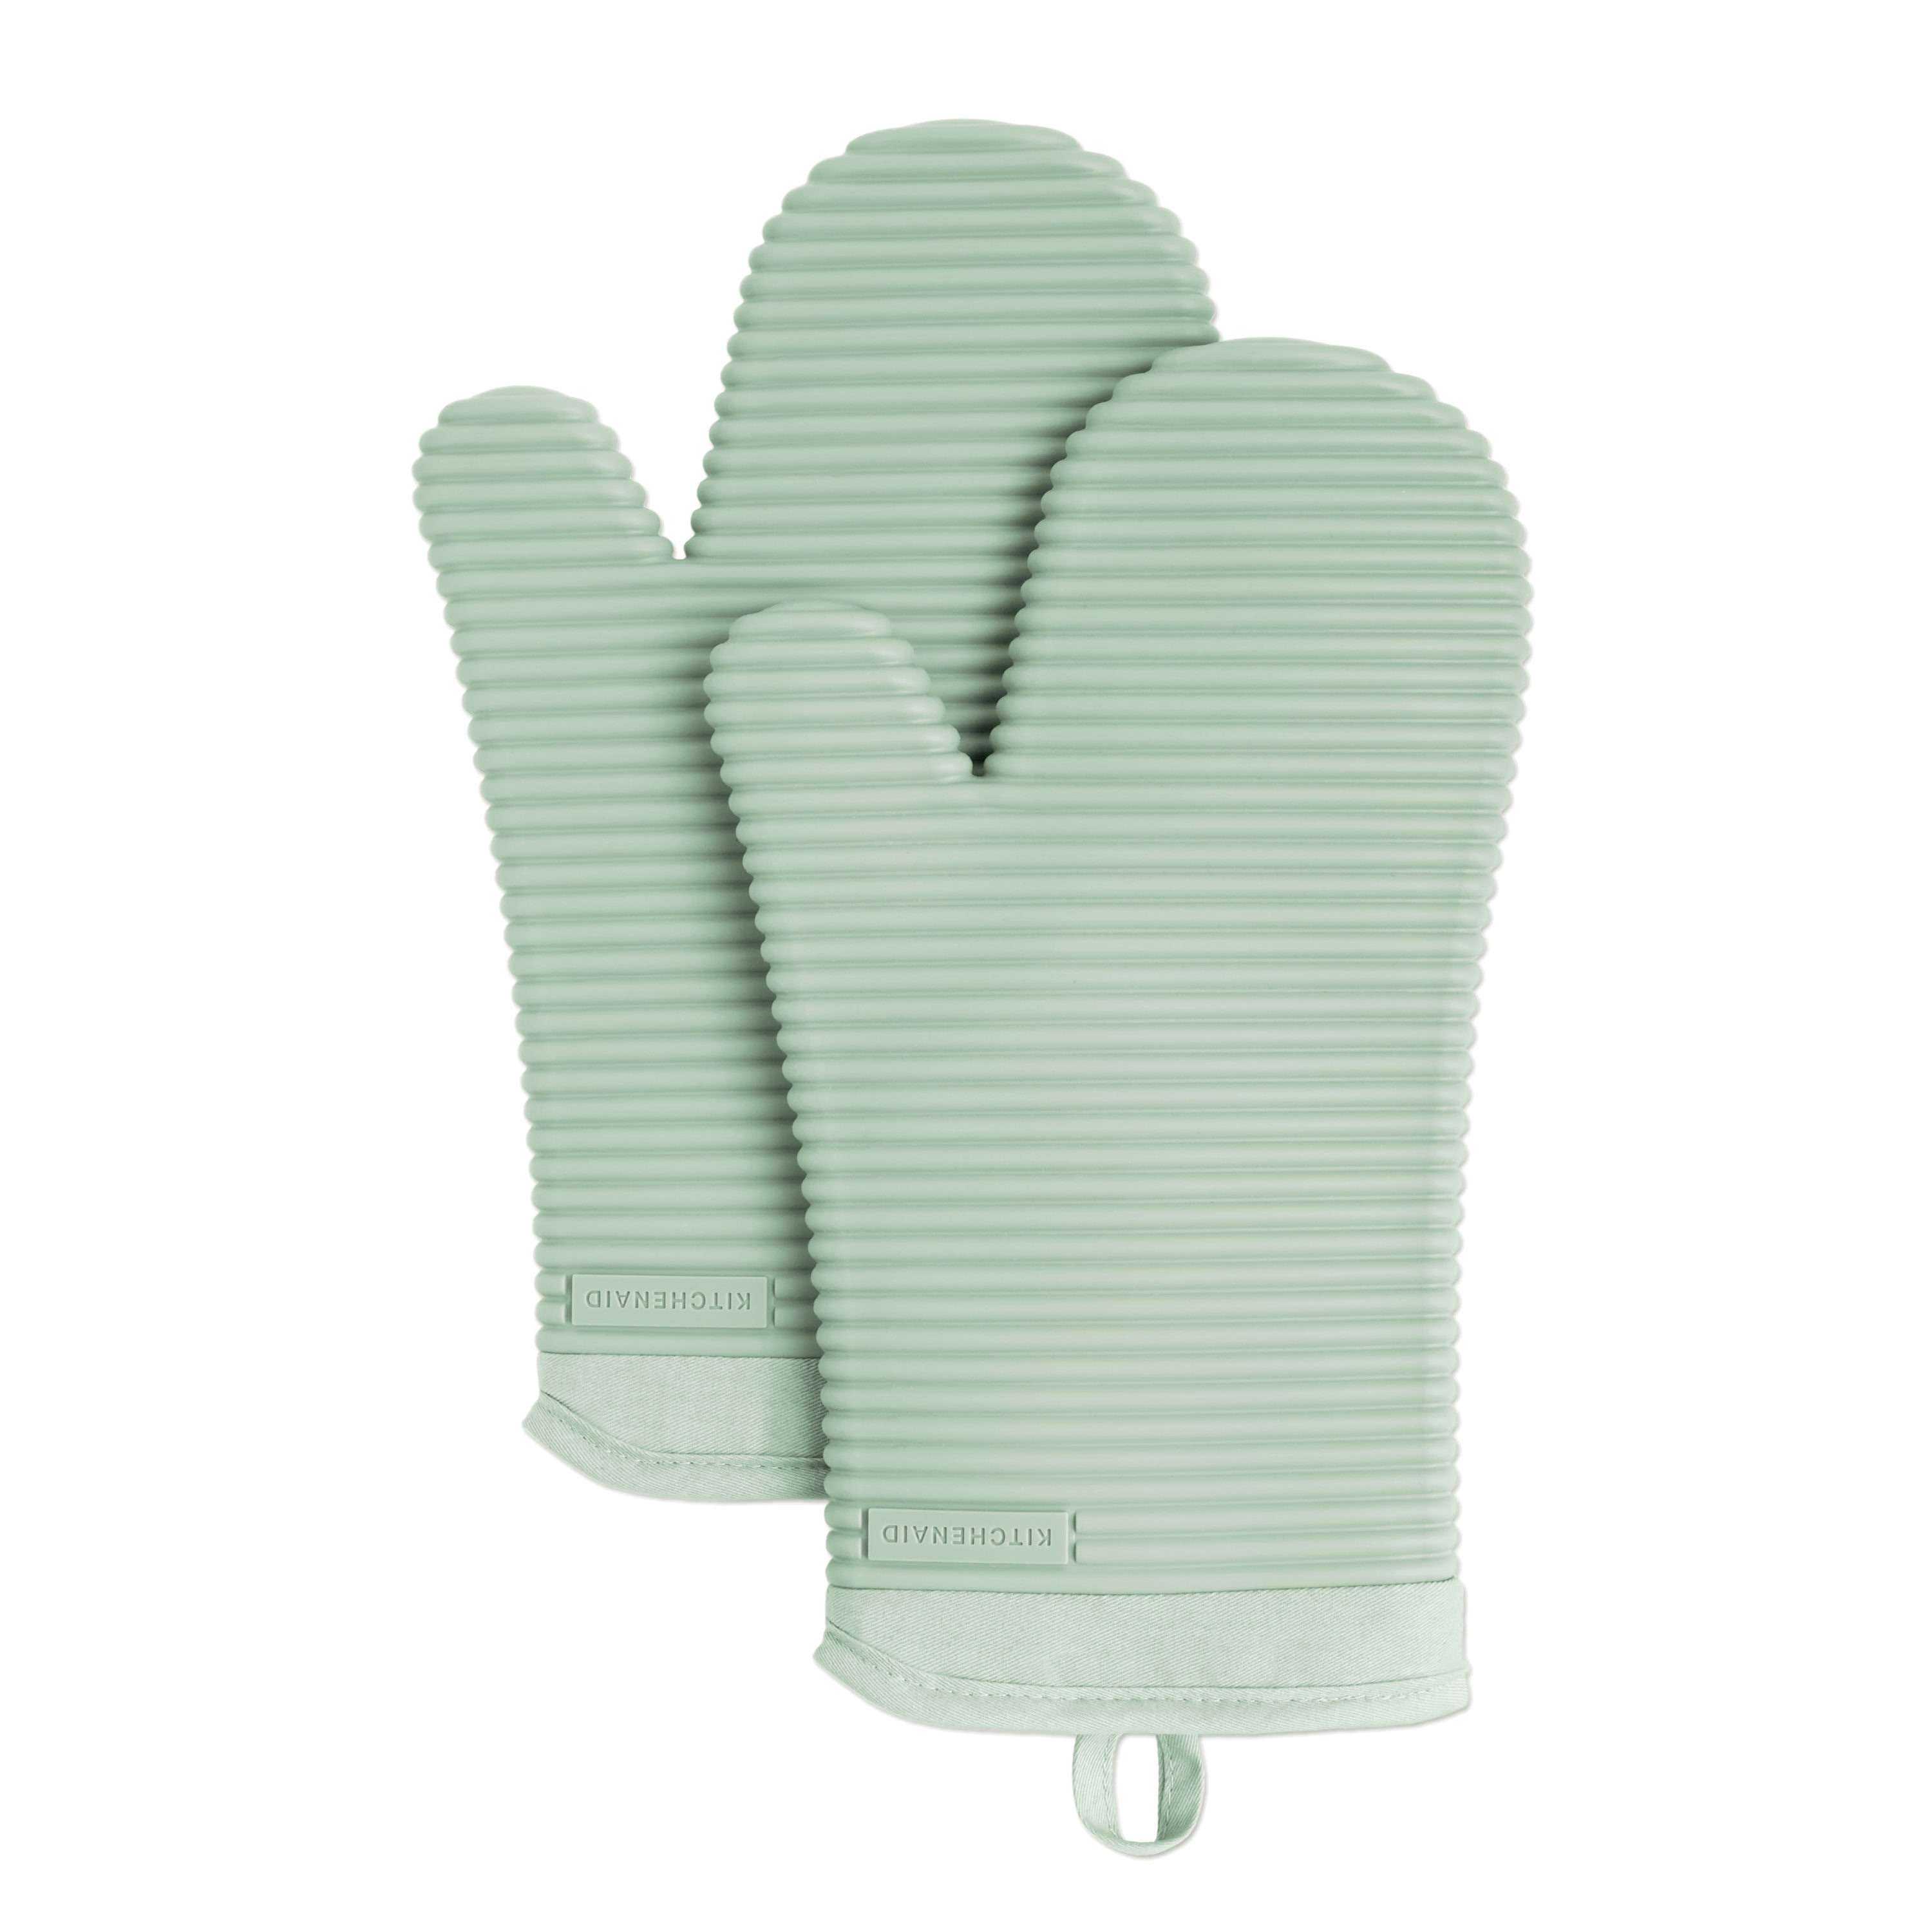 KitchenAid Aqua Sky Cotton Oven Mitt Set - Durable and Heat Resistant -  Slip-Resistant Silicone Grip - Set of 2 Albany Mitts - 7.25x13 Inches in  the Kitchen Towels department at